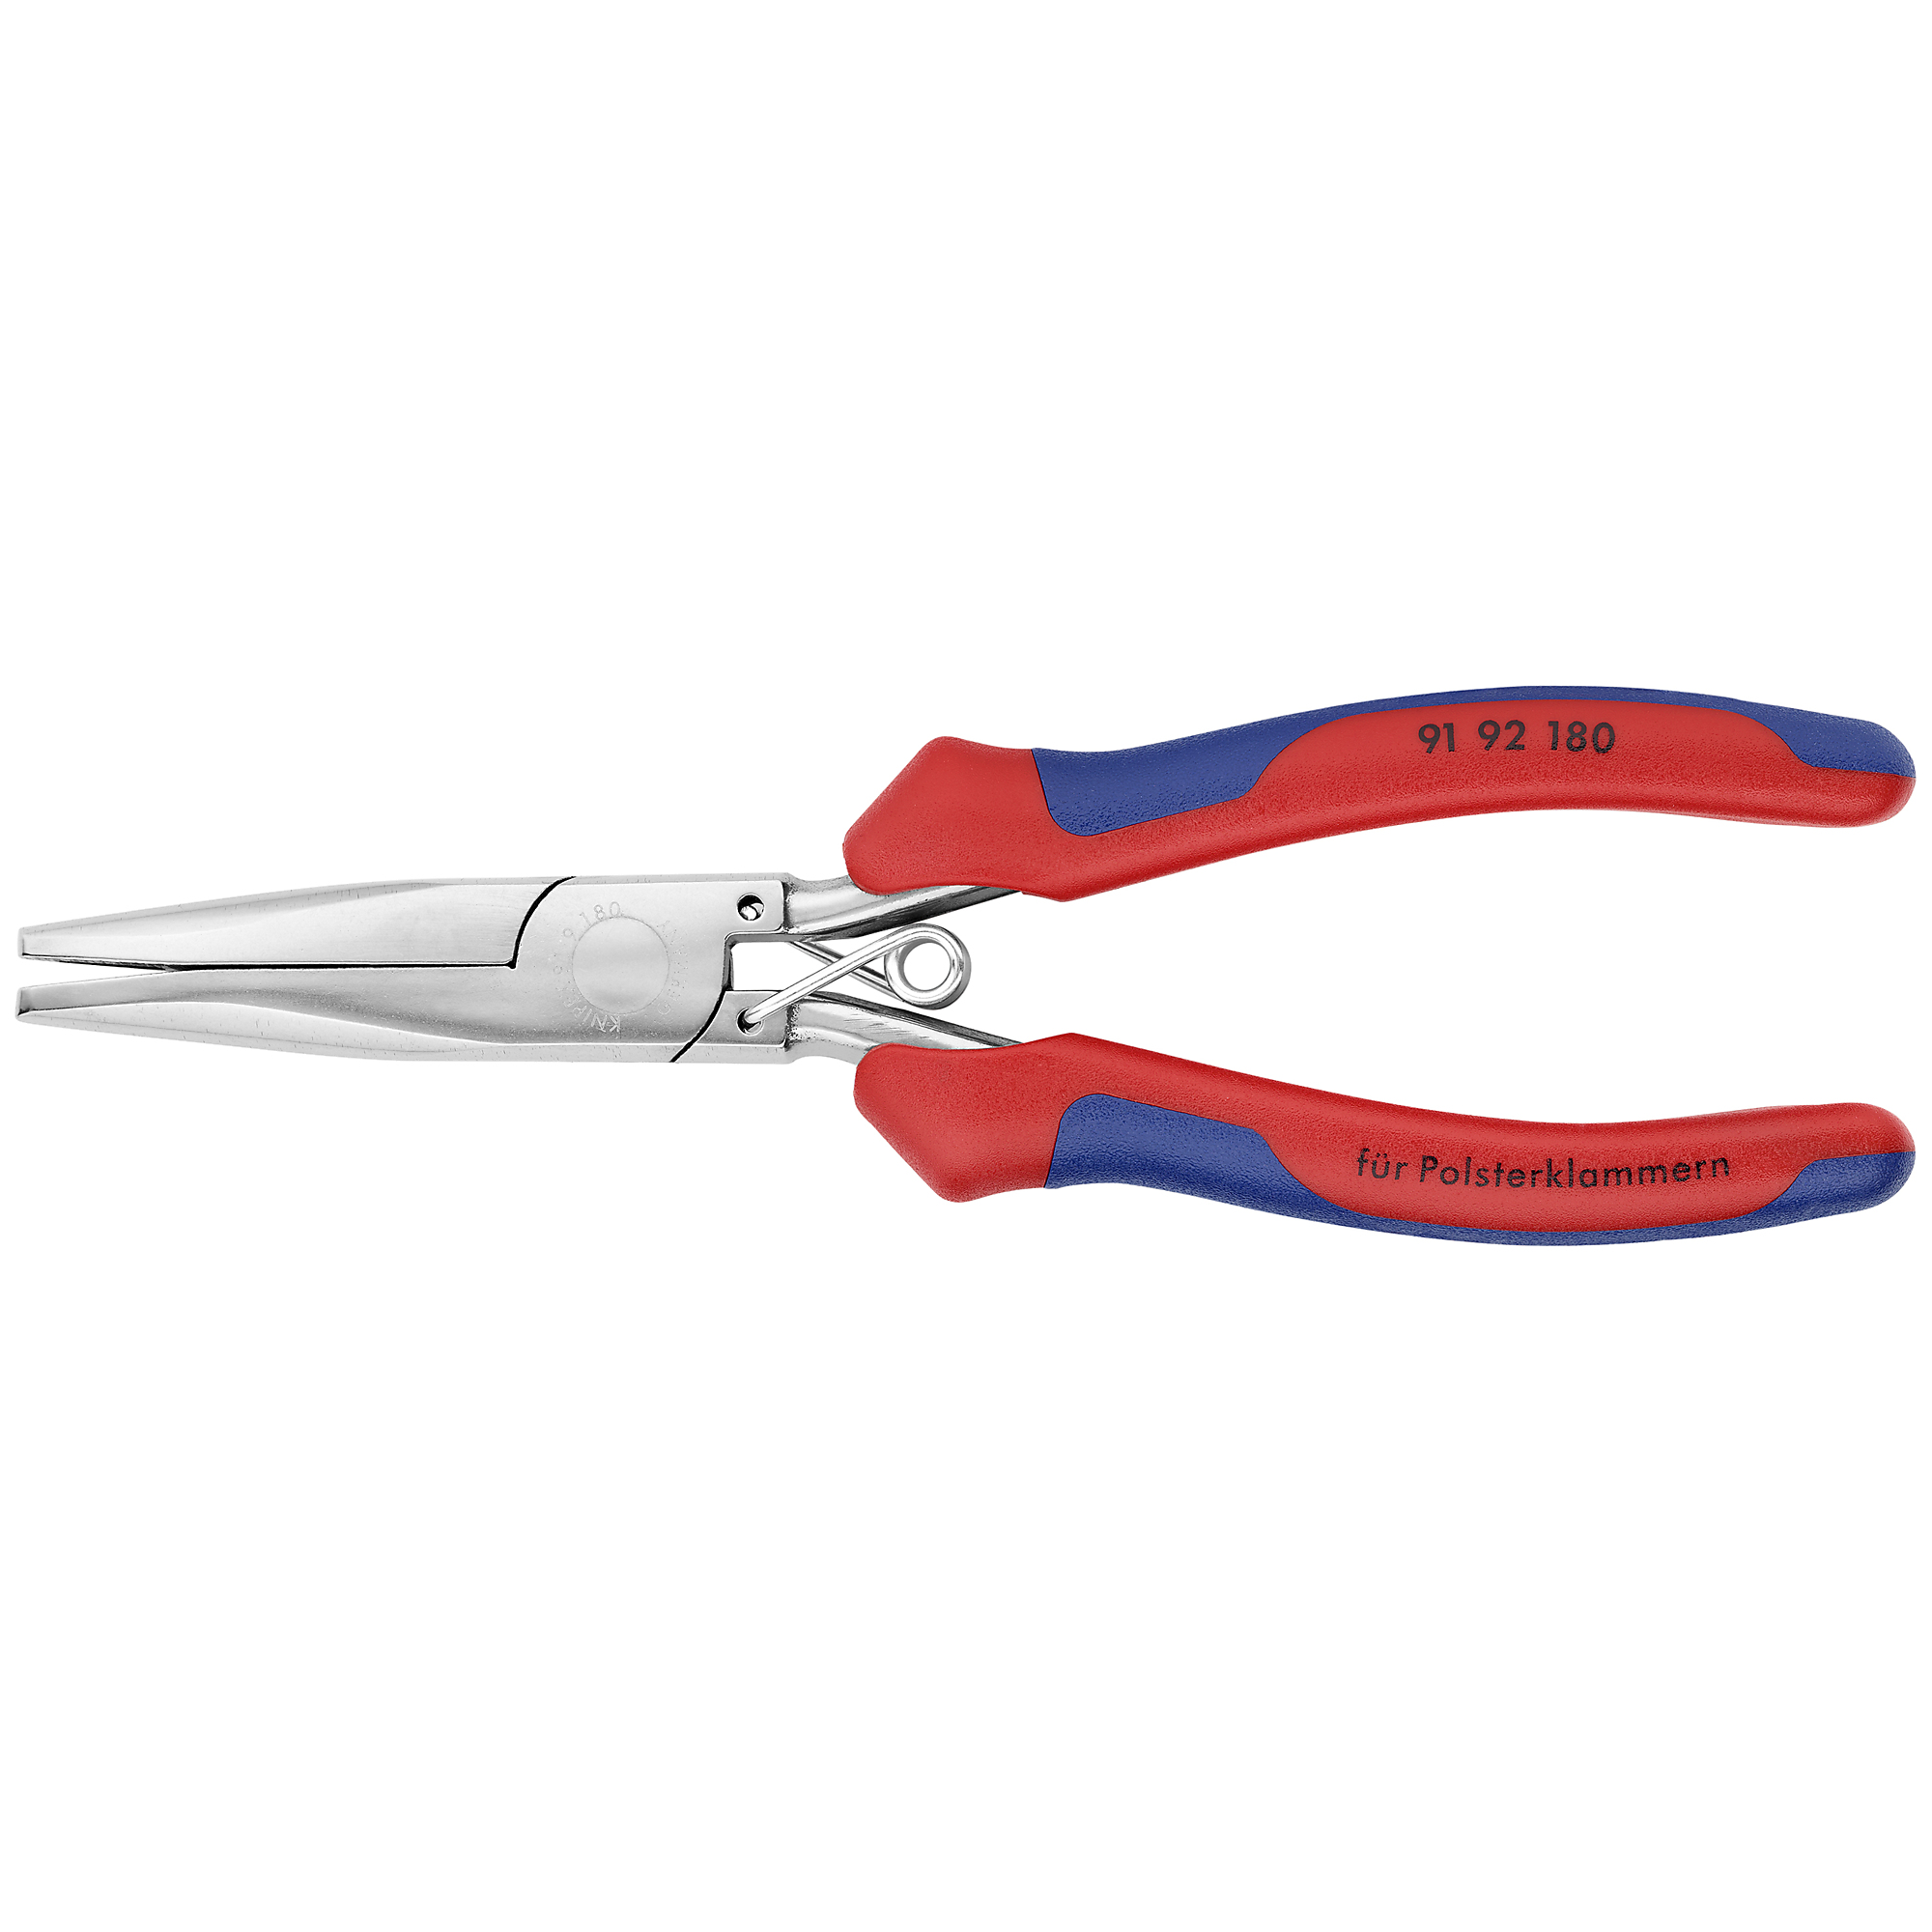 KNIPEX, Hog Ring Pliers, Comfort grip, 7.25Inch, Pieces (qty.) 1 Material Steel, Model 91 92 180